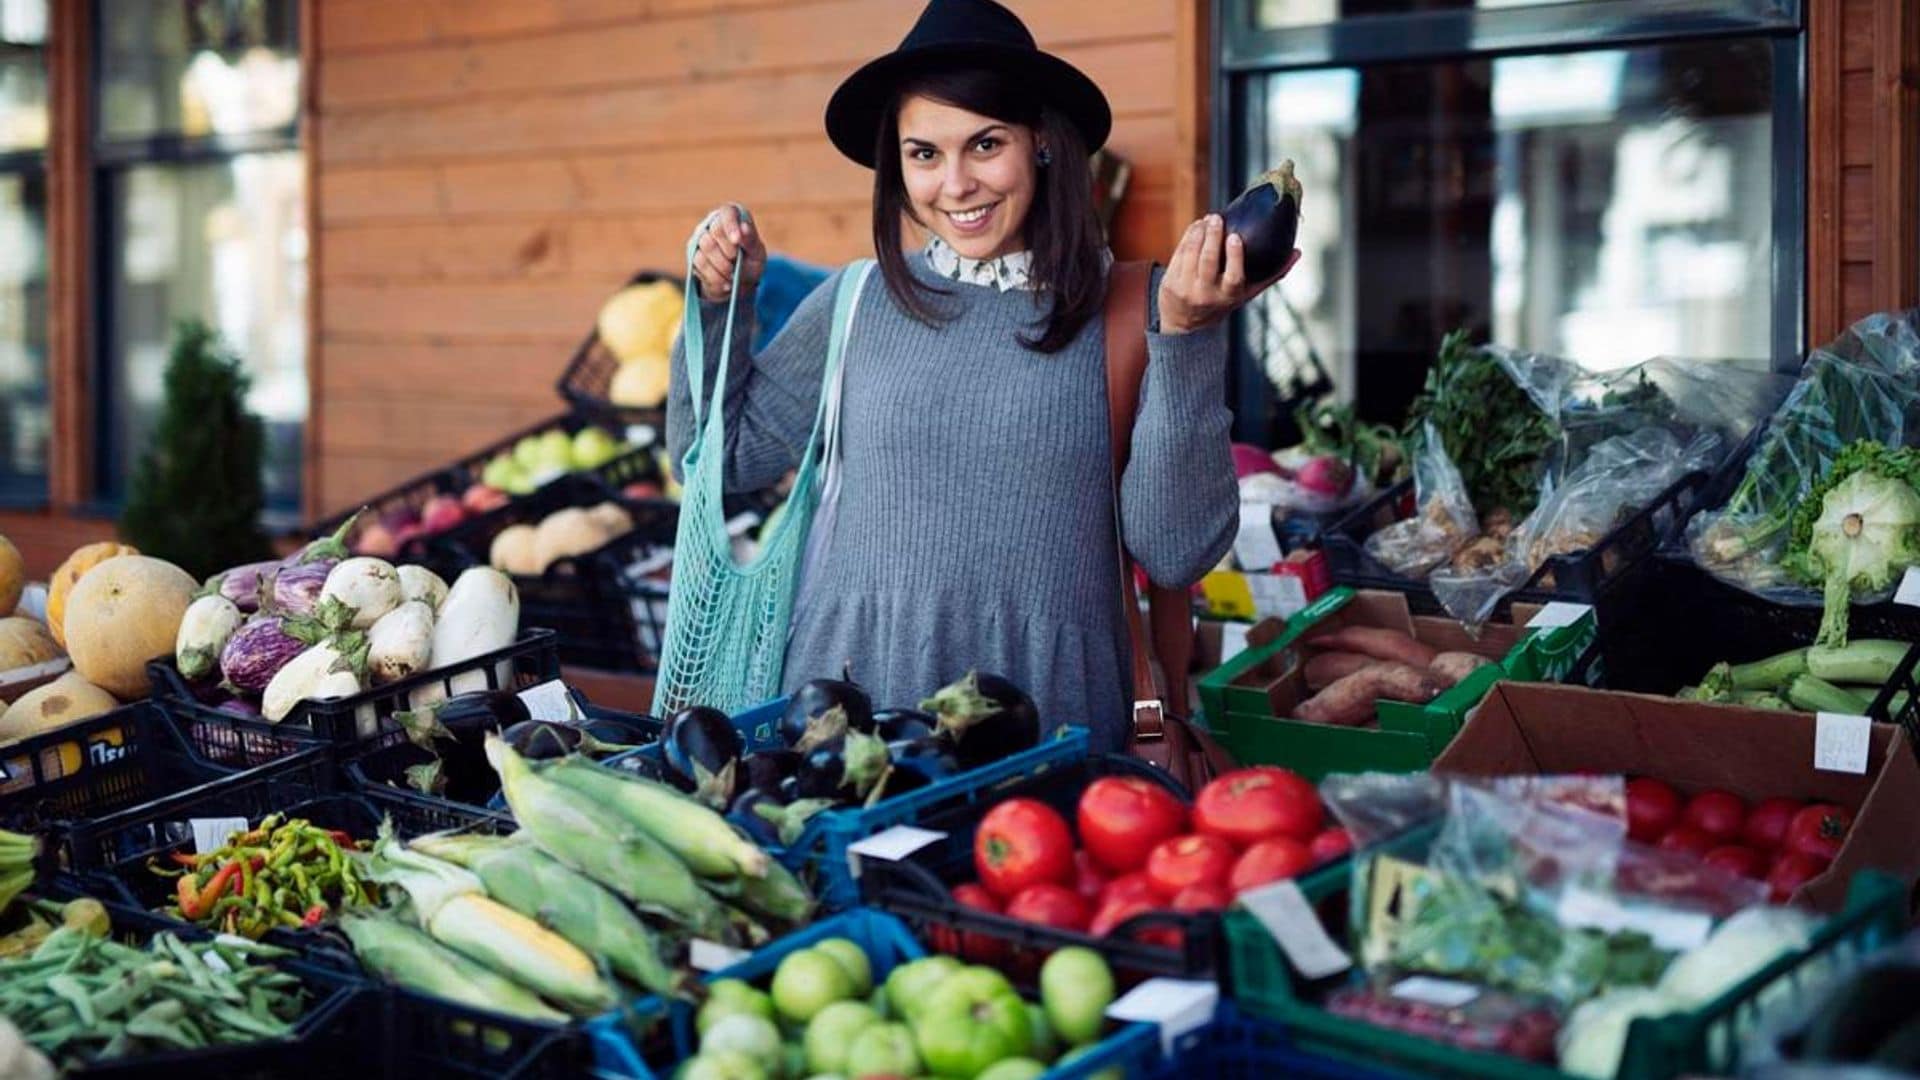 Get cooking inspiration at your favorite local farmers market